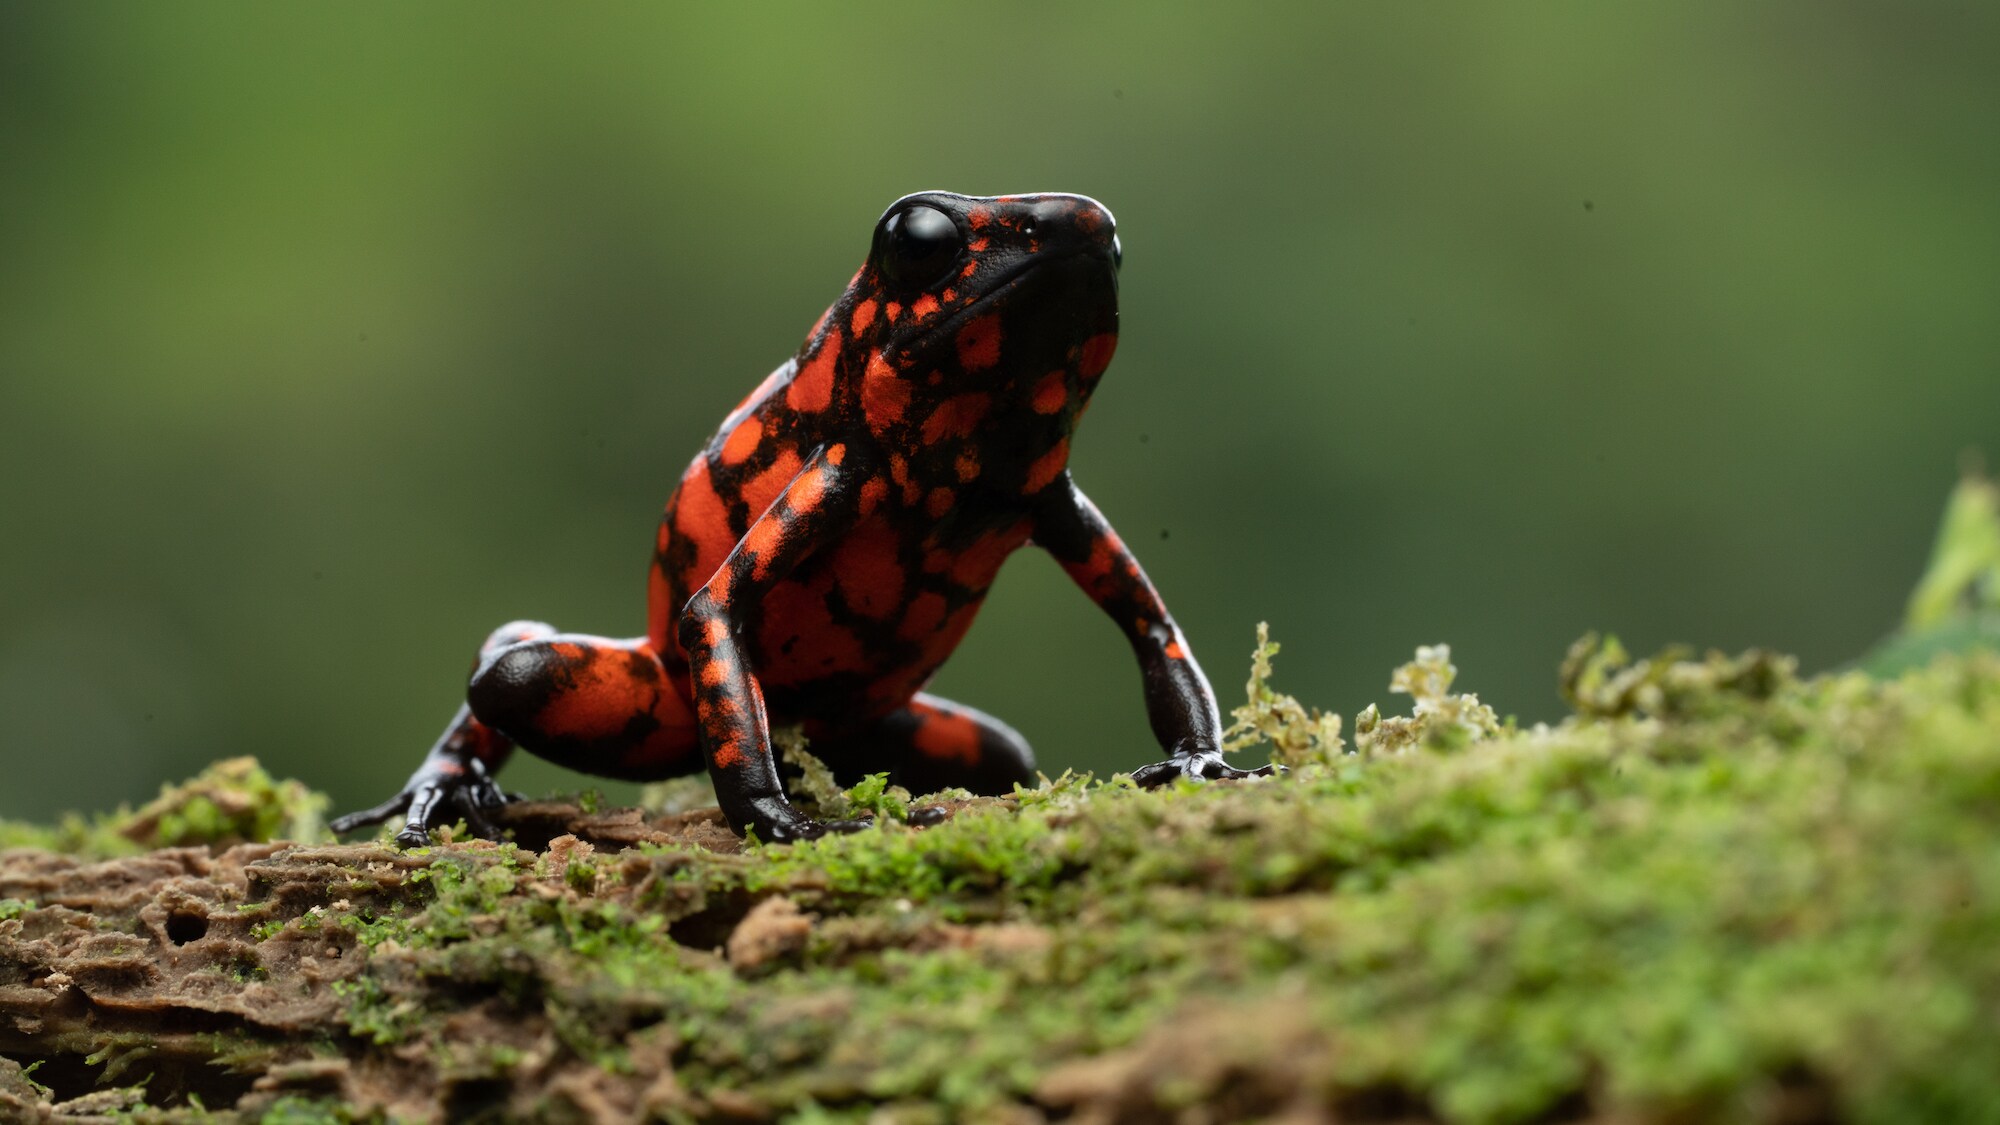 Little devil poison dart frog on a mossy log. (National Geographic for Disney+/Chris Watts